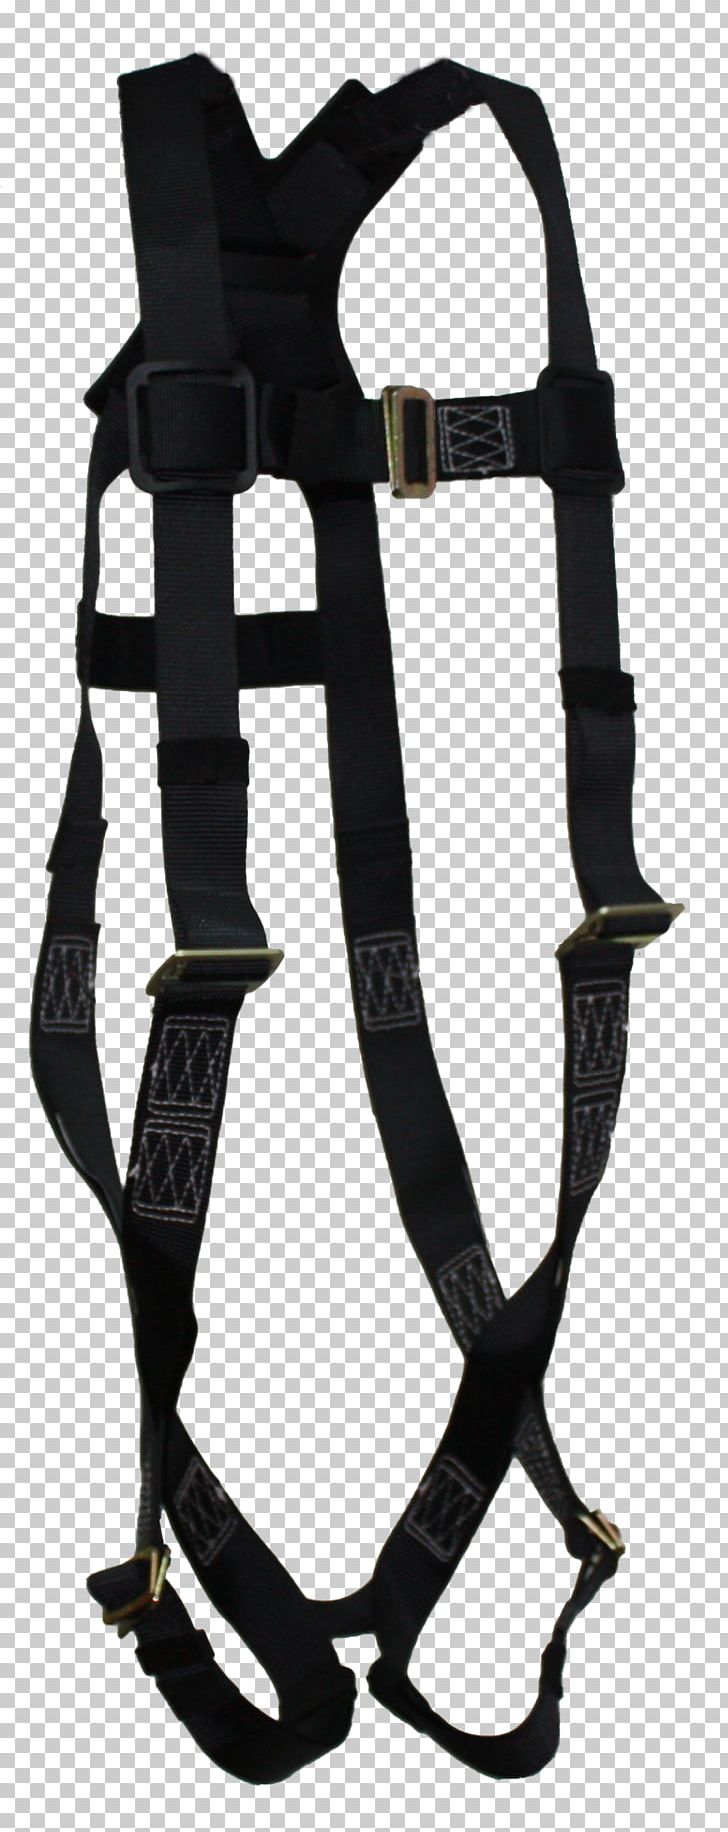 Climbing Harnesses Safety Harness Personal Protective Equipment D-ring PNG, Clipart, Belt, Body Harness, Buckle, Climbing, Climbing Harness Free PNG Download